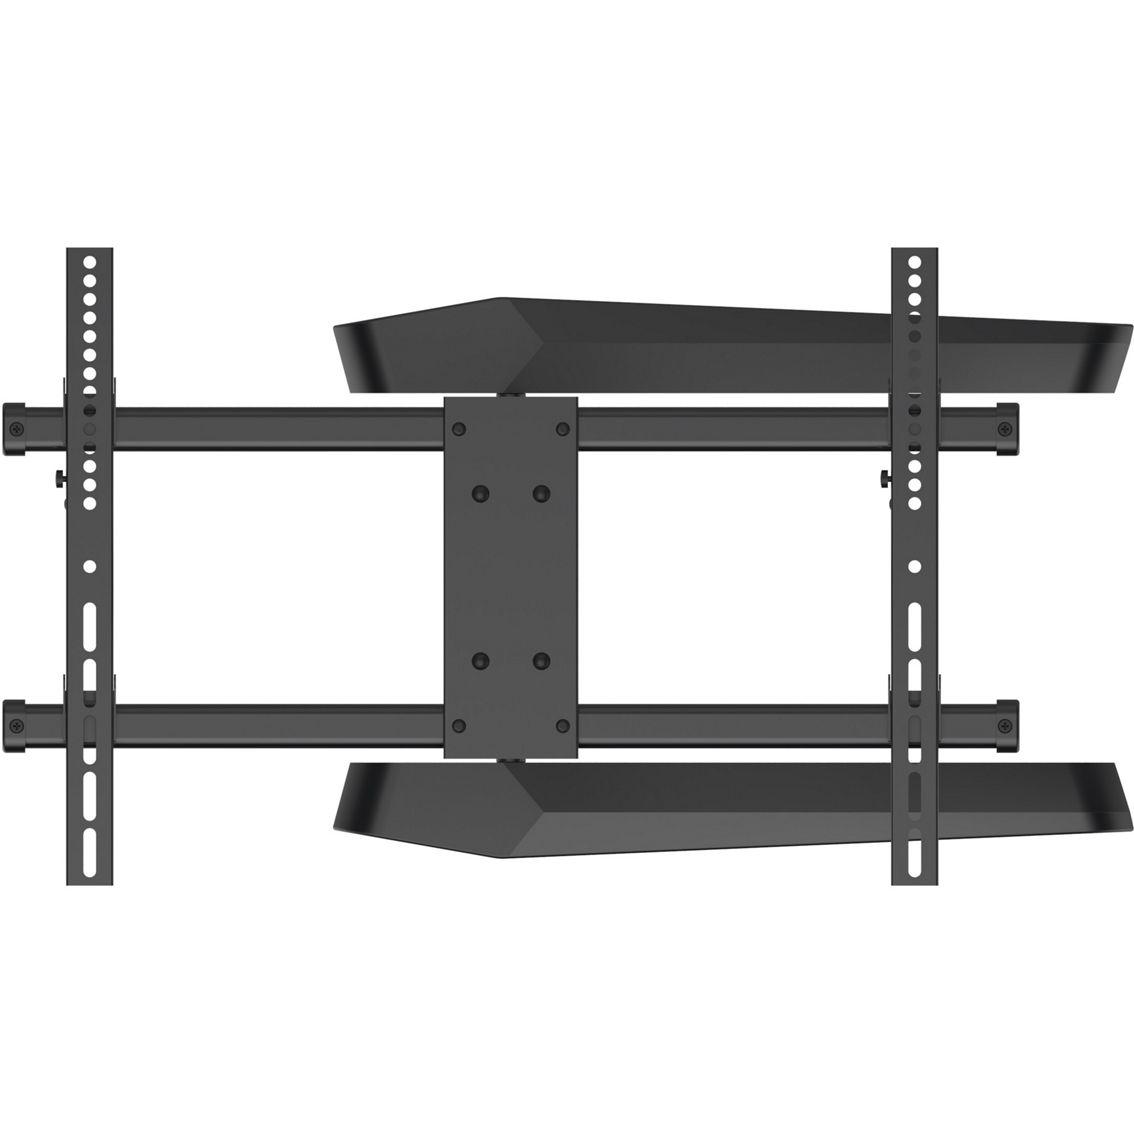 ProMounts FSA64 Articulating Wall Mount for 42 to 70 in. Screens - Image 8 of 9